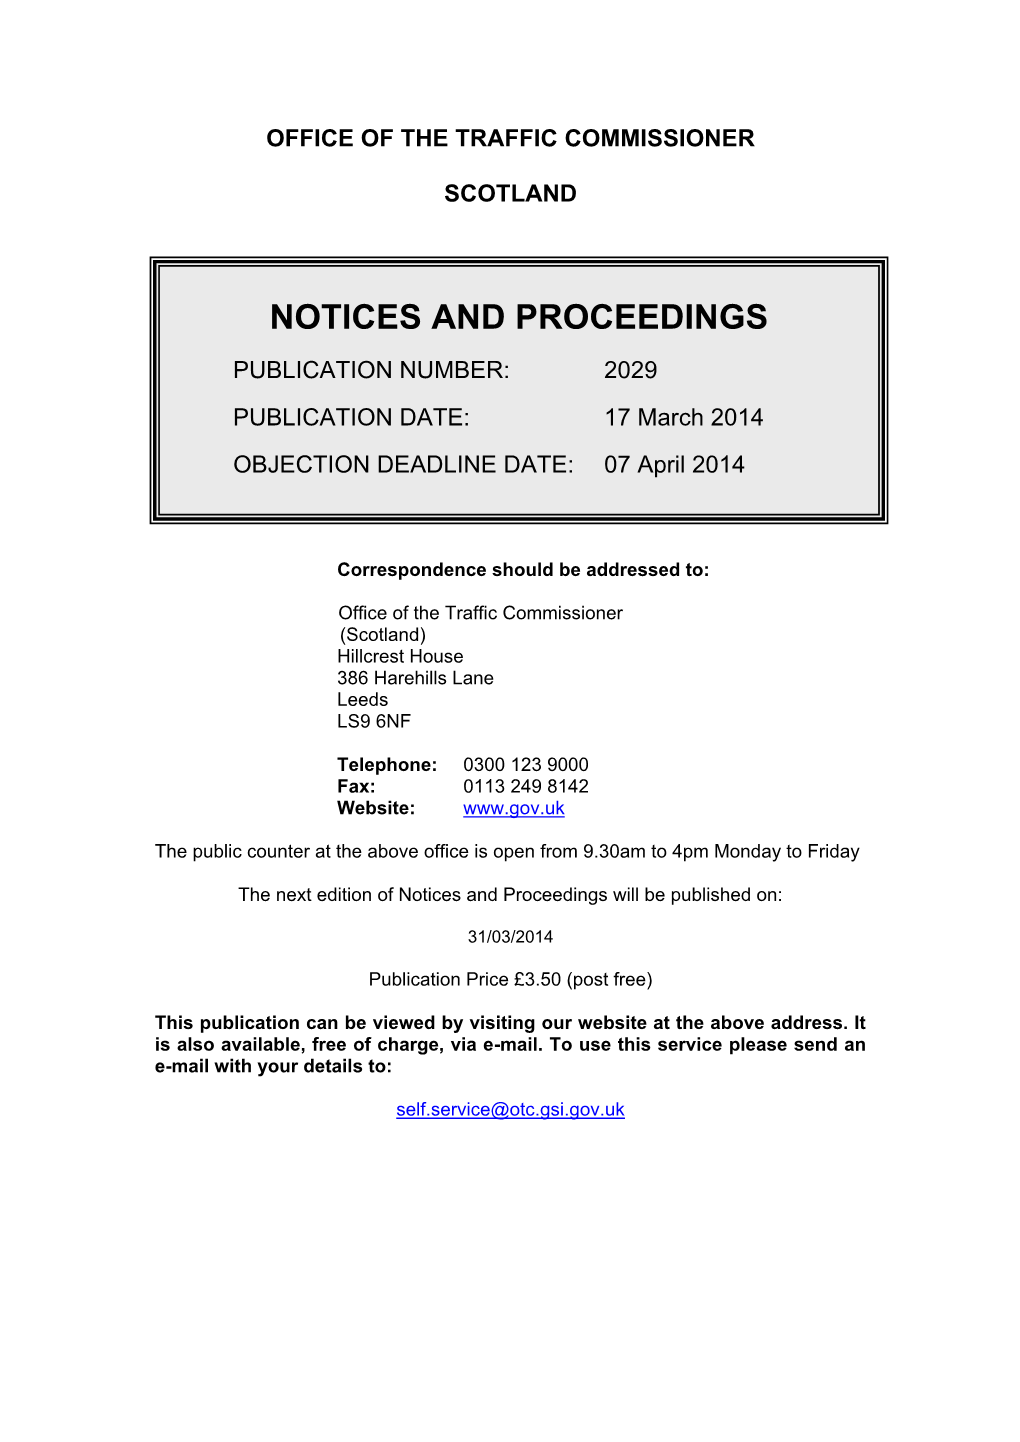 Notices and Proceedings: Scotland: 17 March 2014